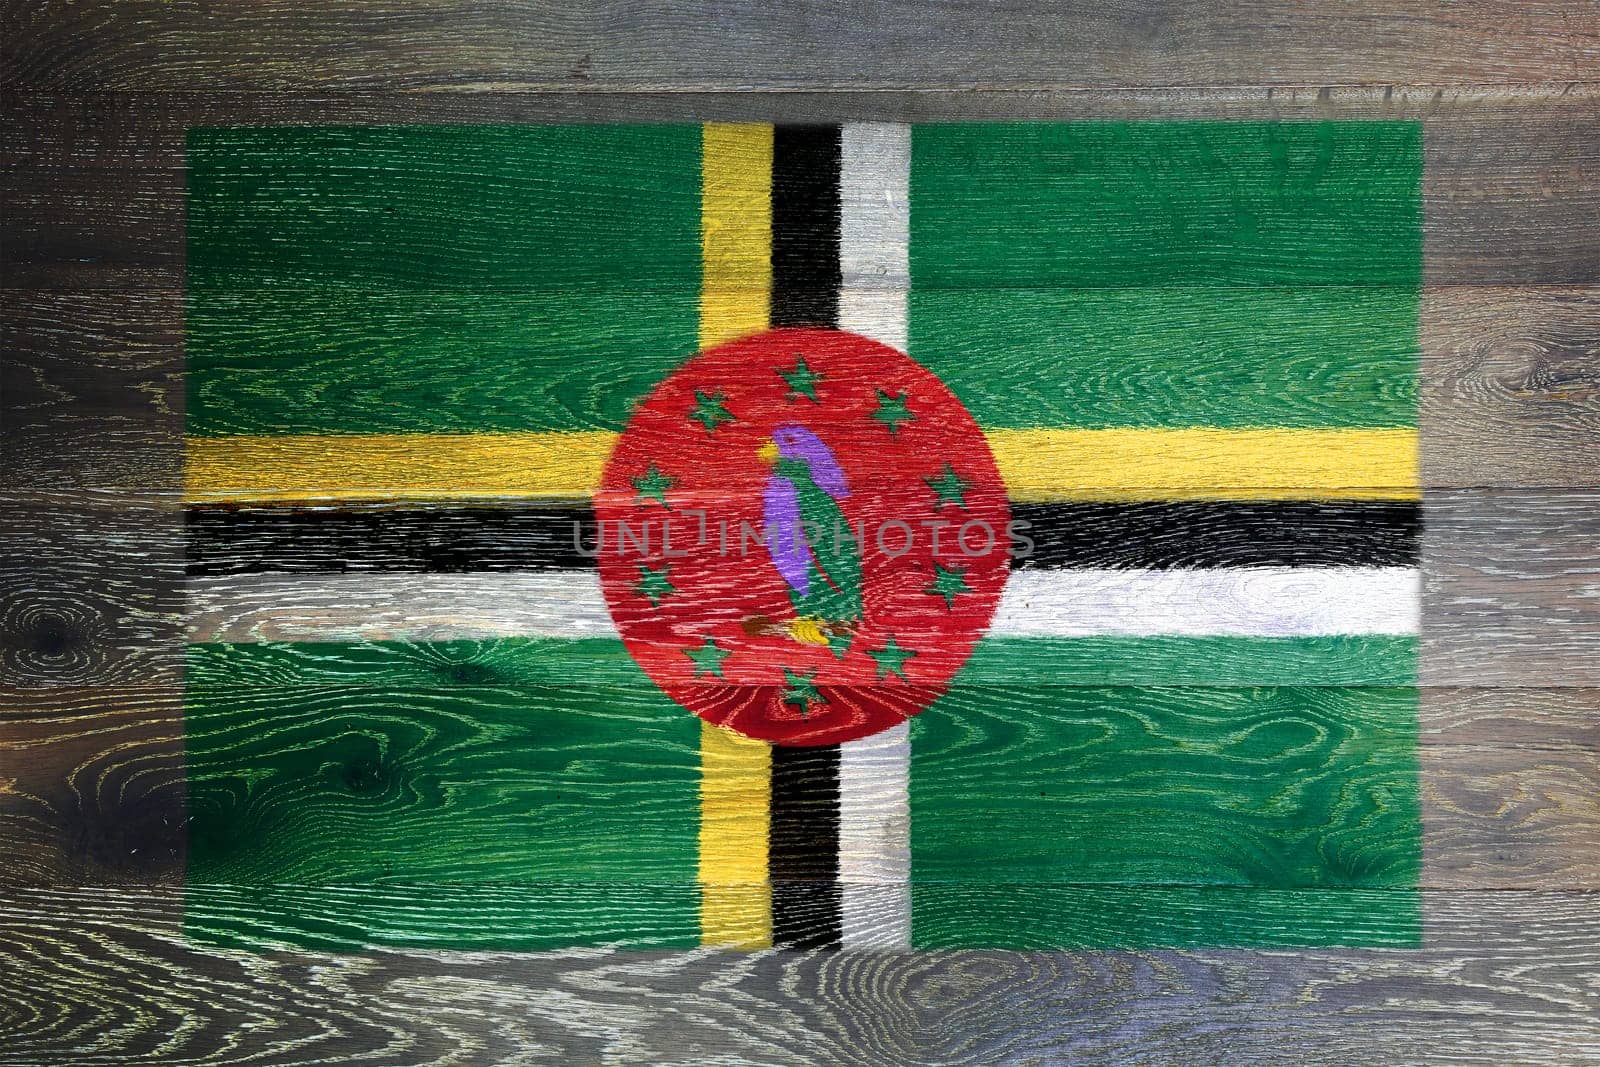 A Dominica flag on rustic old wood surface background green yellow black red sisserou parrot